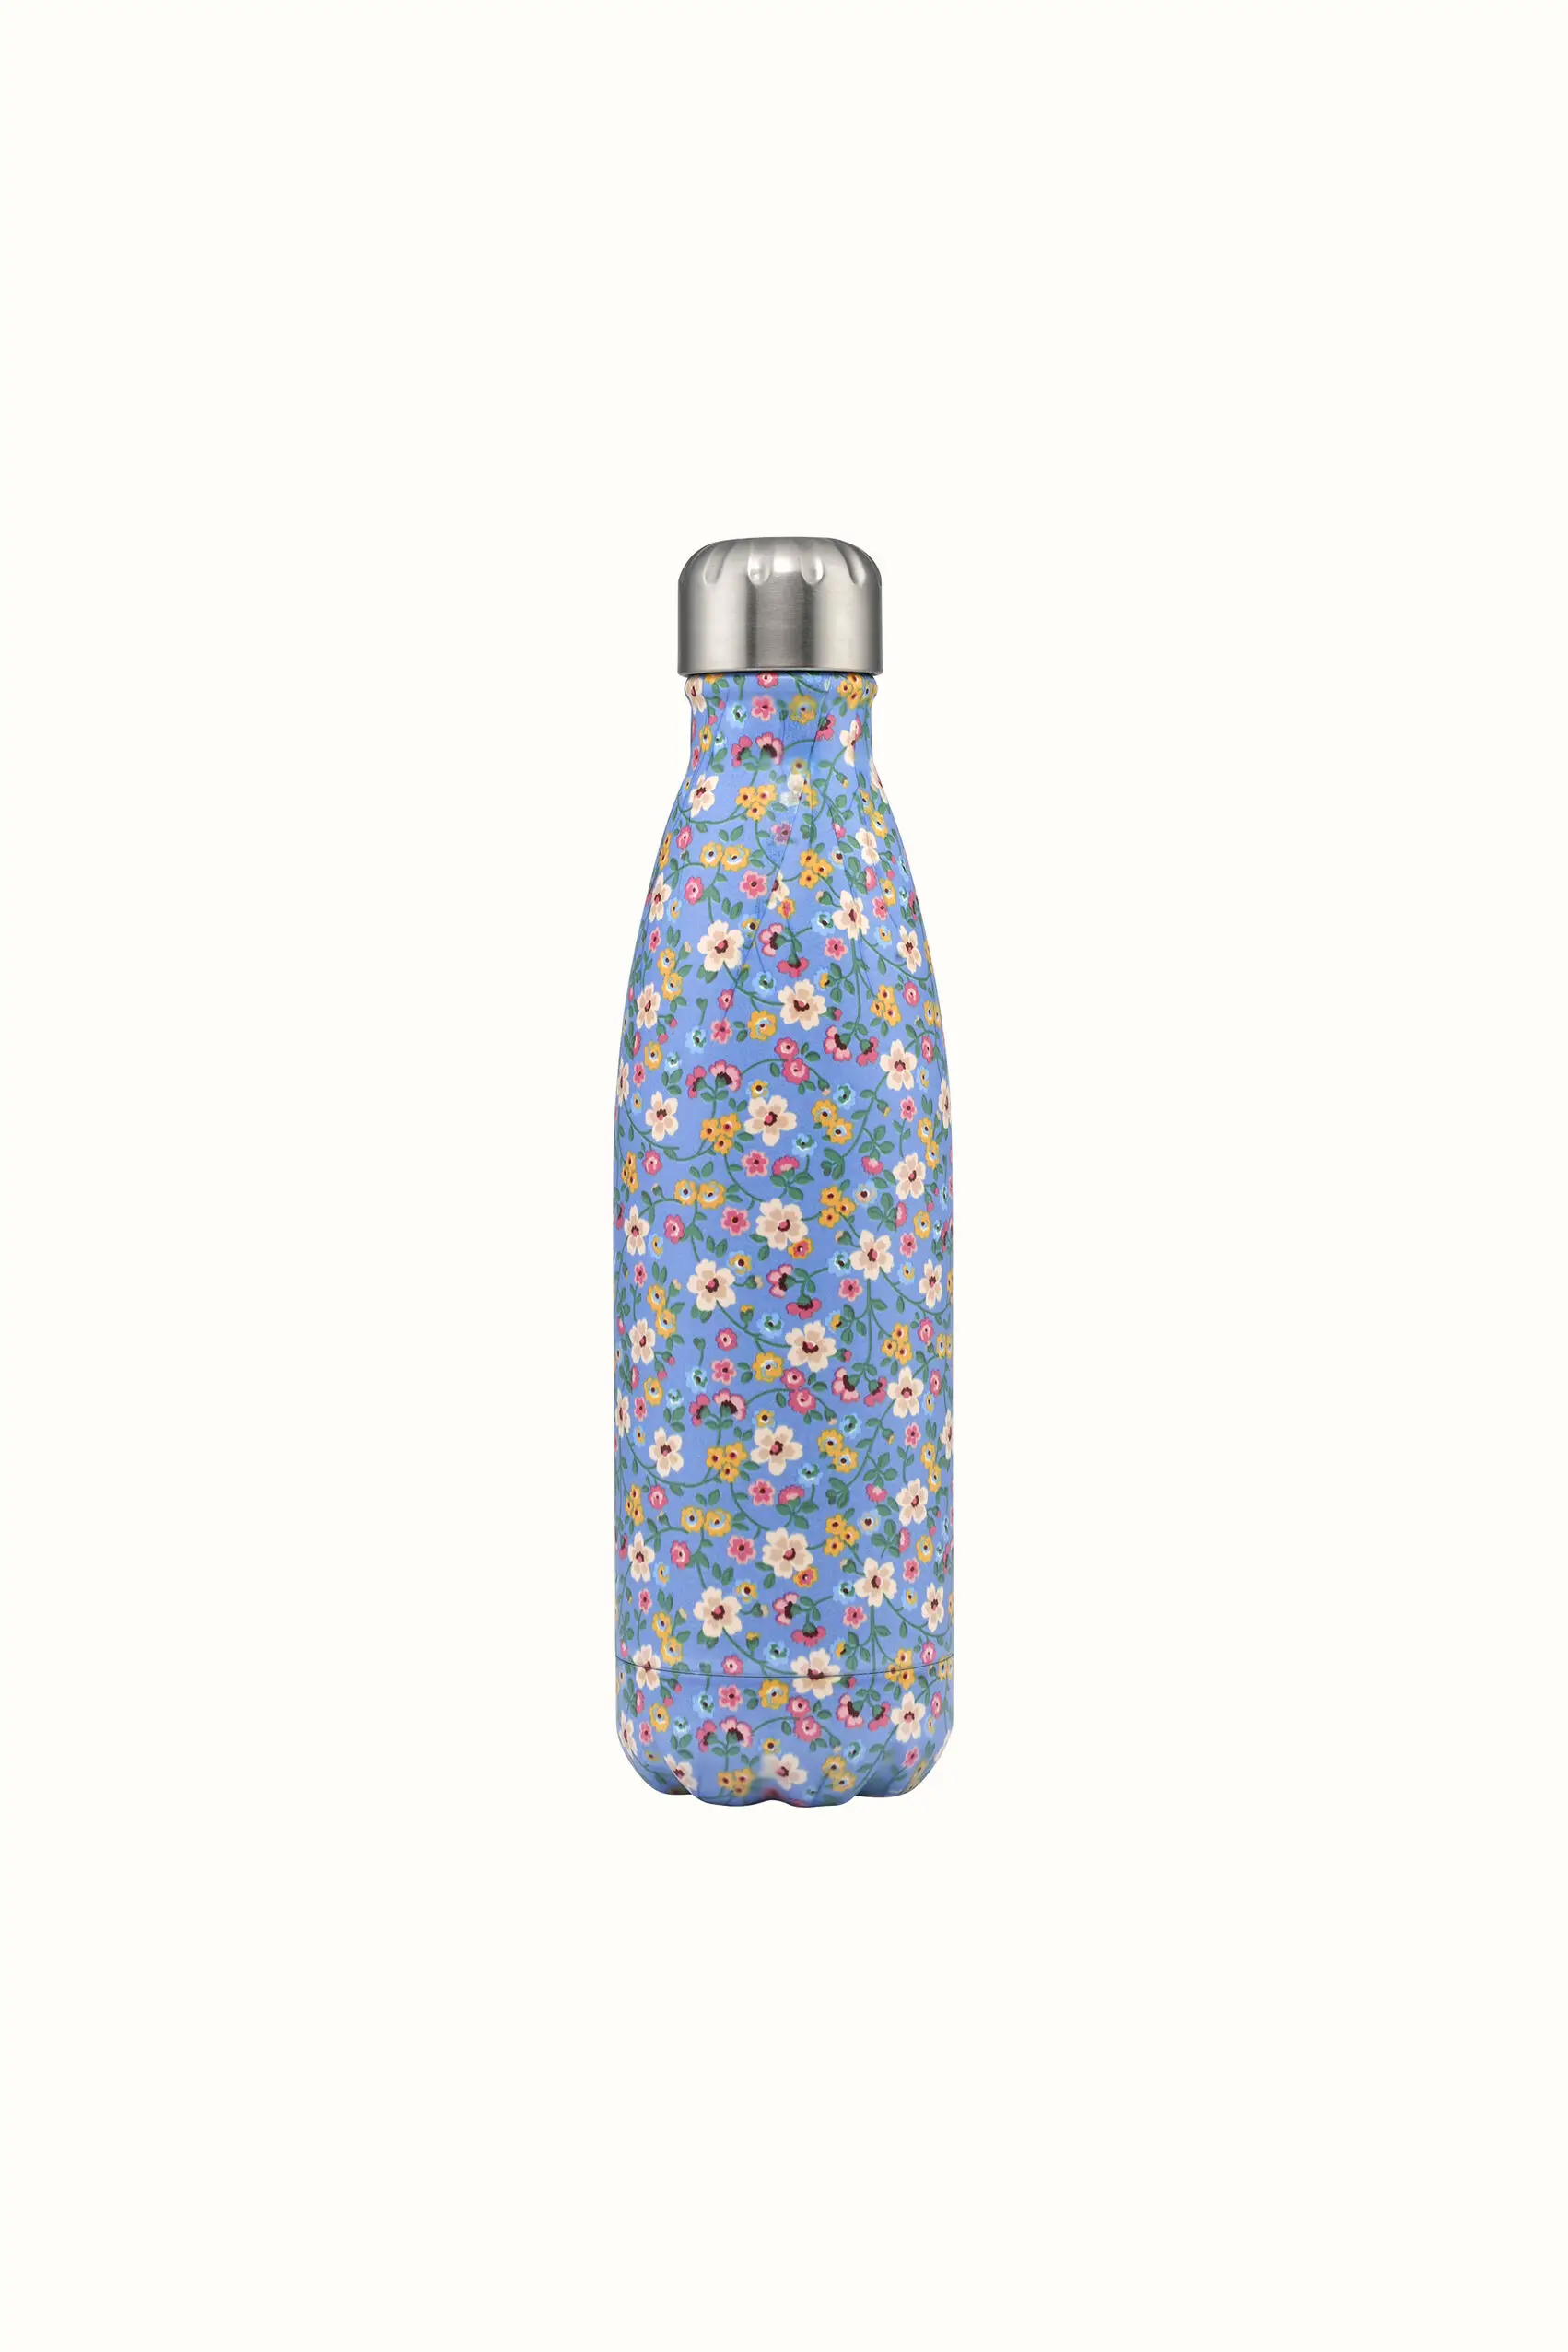 Cath Kidston floral water bottle